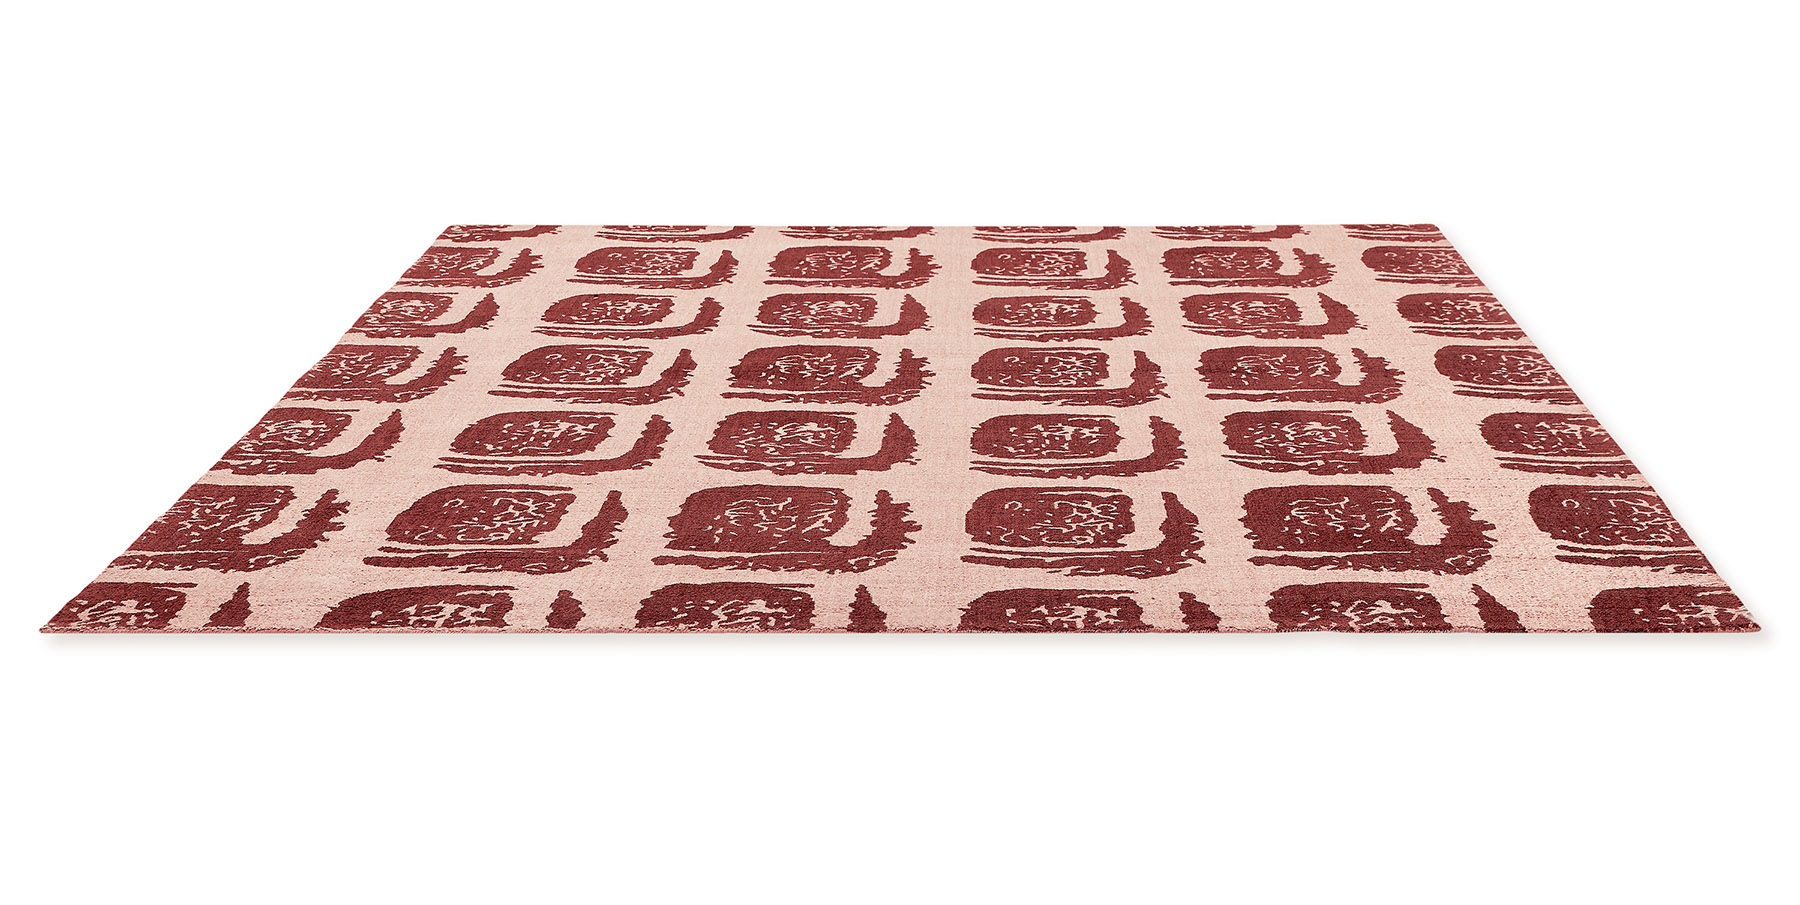 Woodblock Red Rug ☞ Size: 140 x 200 cm